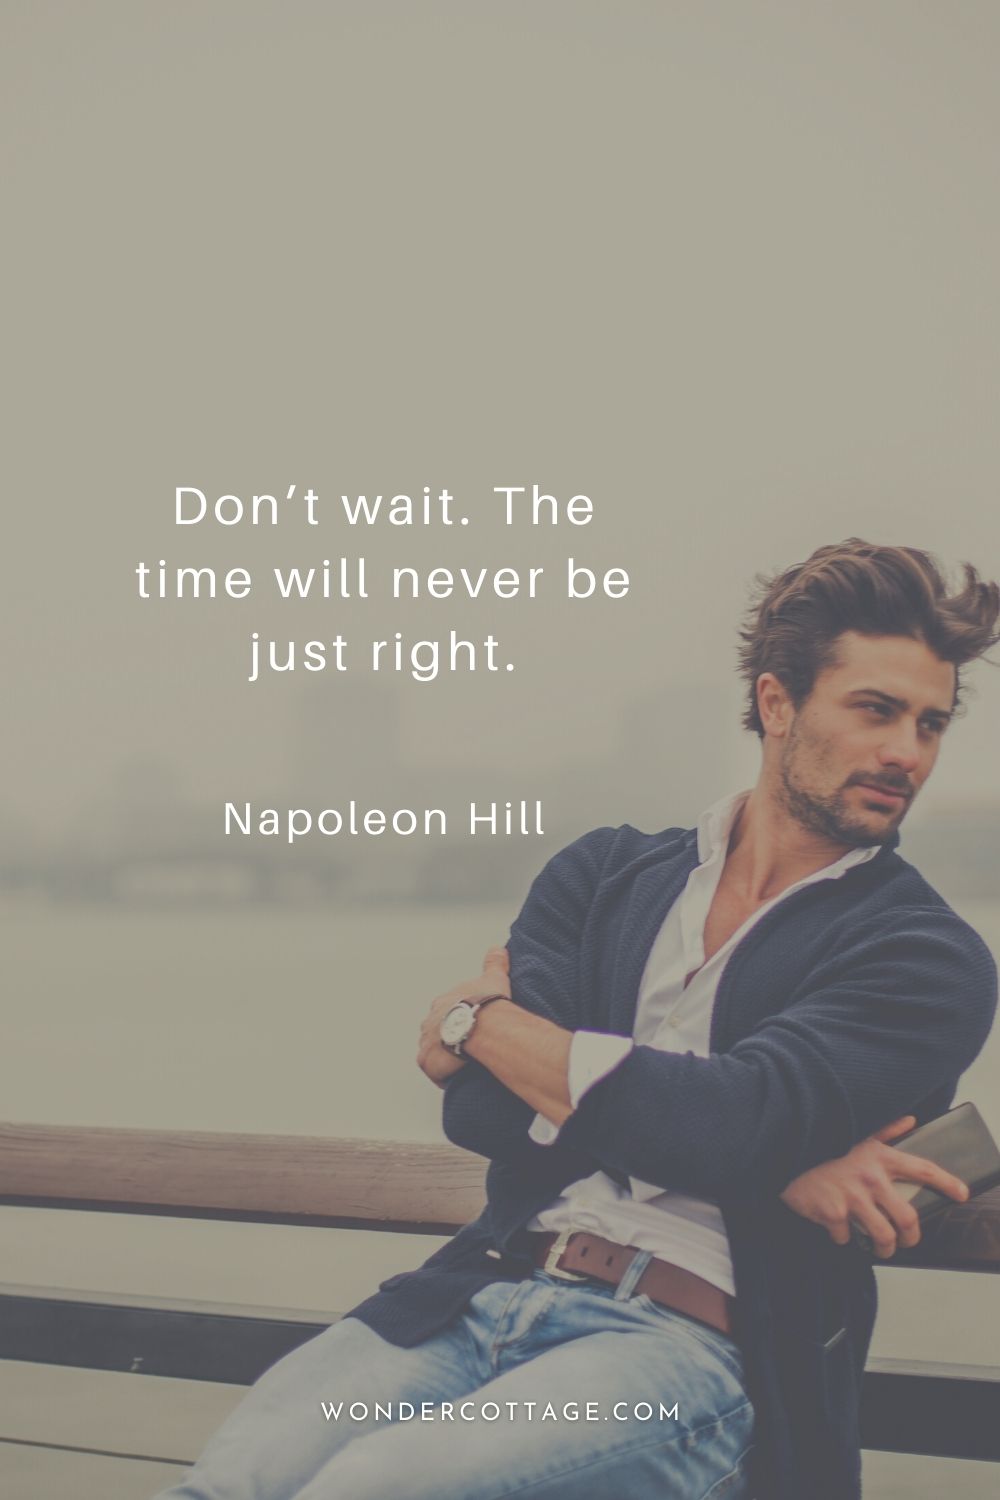 Don’t wait. The time will never be just right. Napoleon Hill